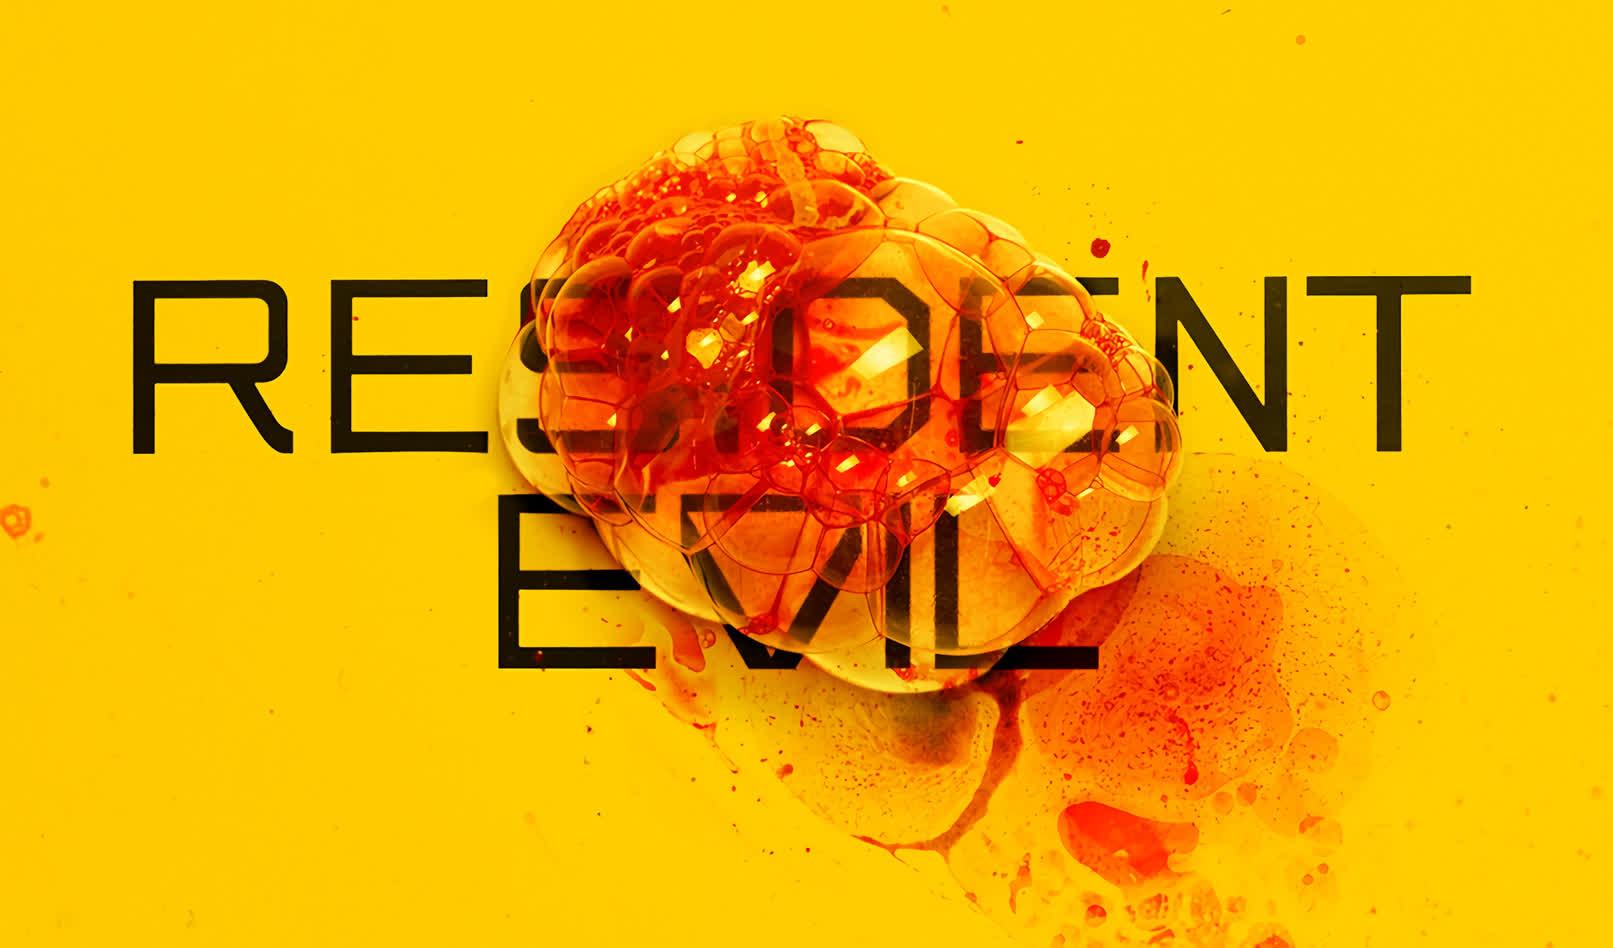 Live-action Resident Evil series coming to Netflix on July 14